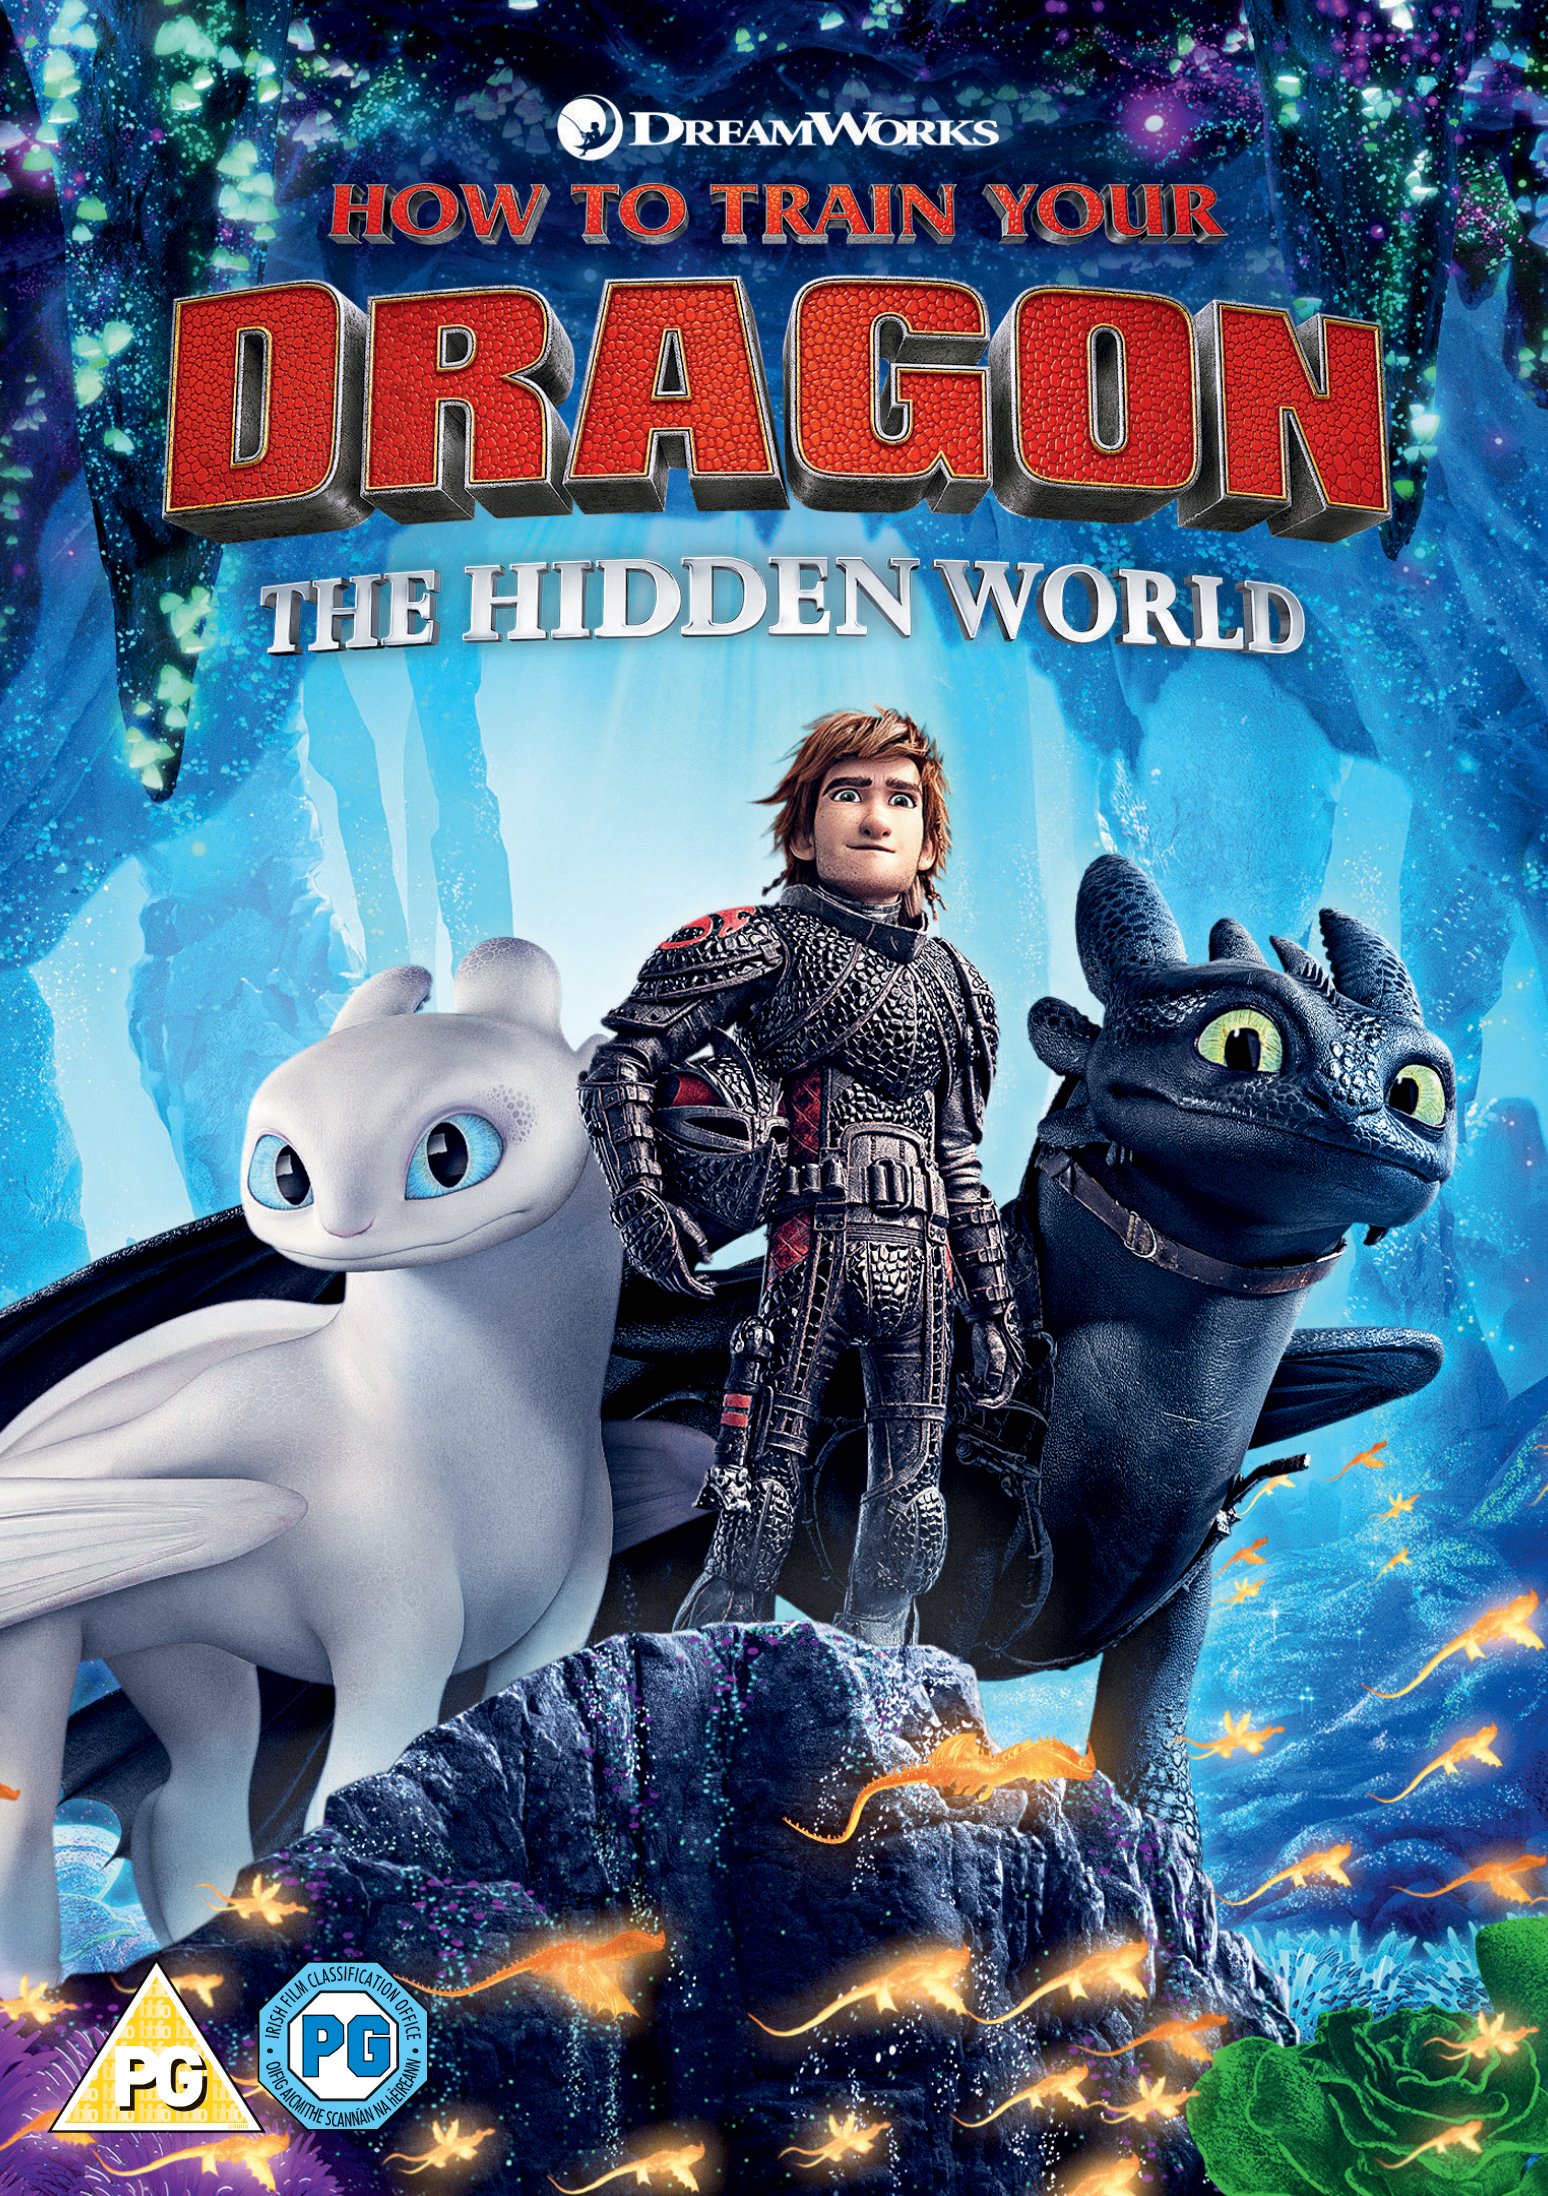 How to Train Your Dragon 3: The Hidden World DVD